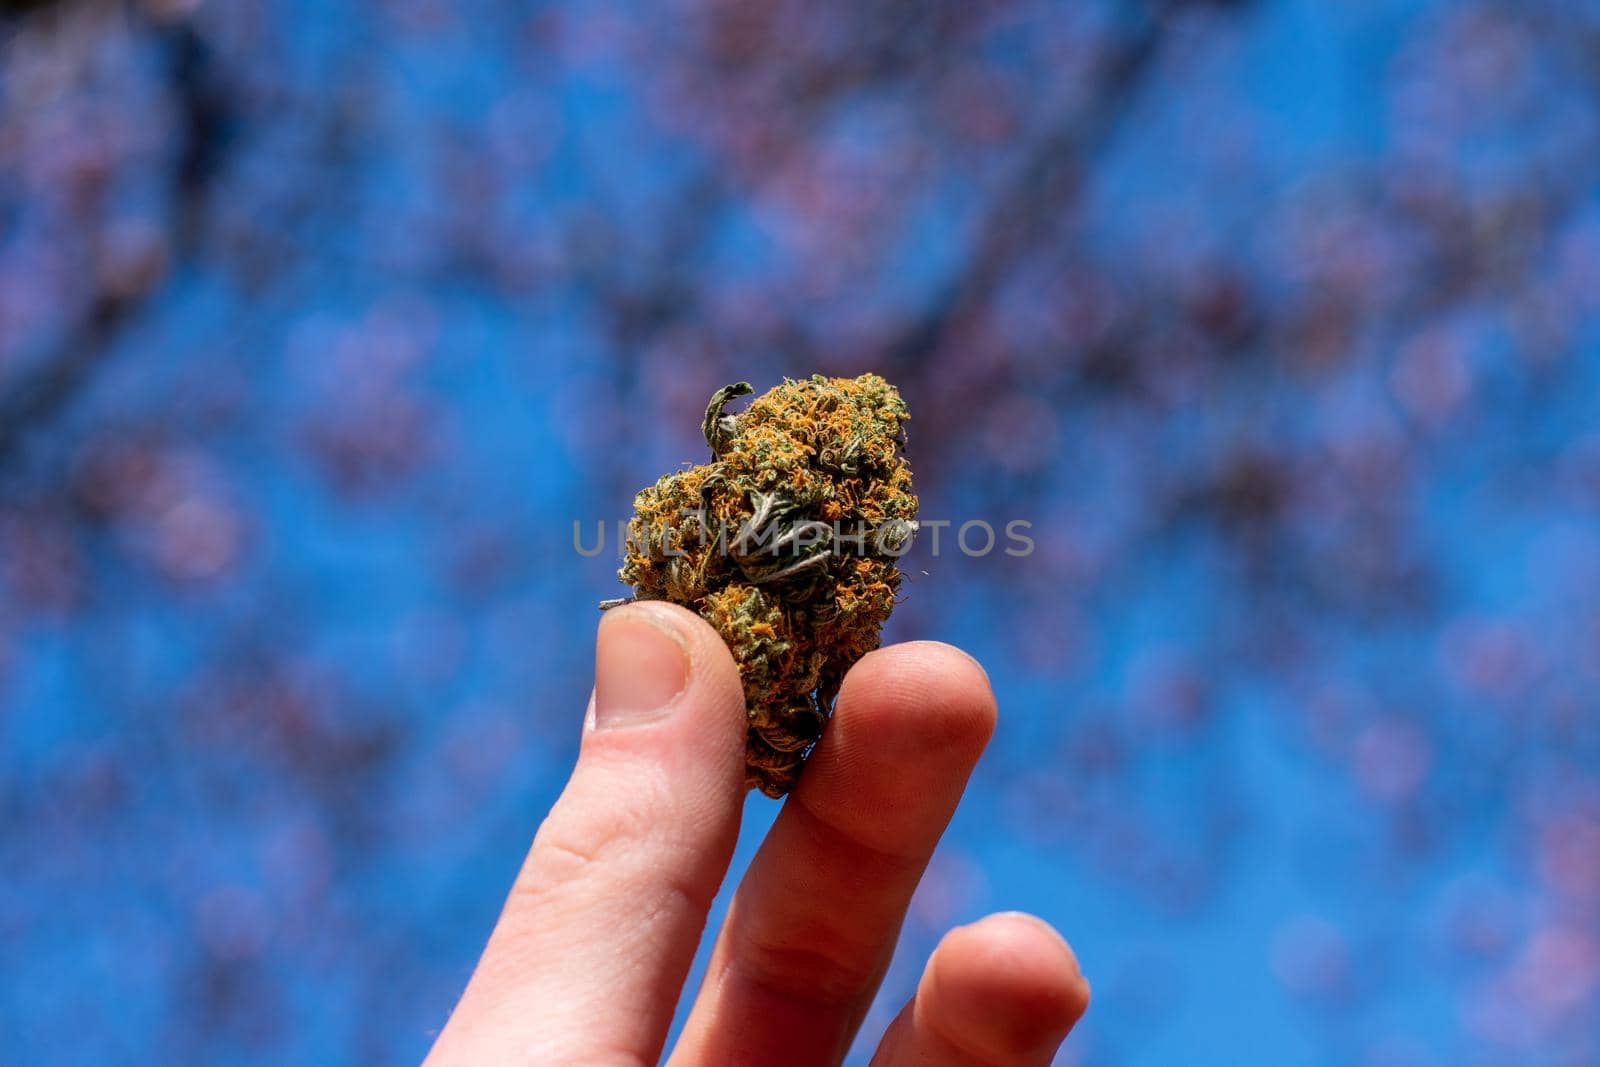 A Hand Holding Up a Cannabis Nug With a Cherry Blossom Tree Behind by bju12290